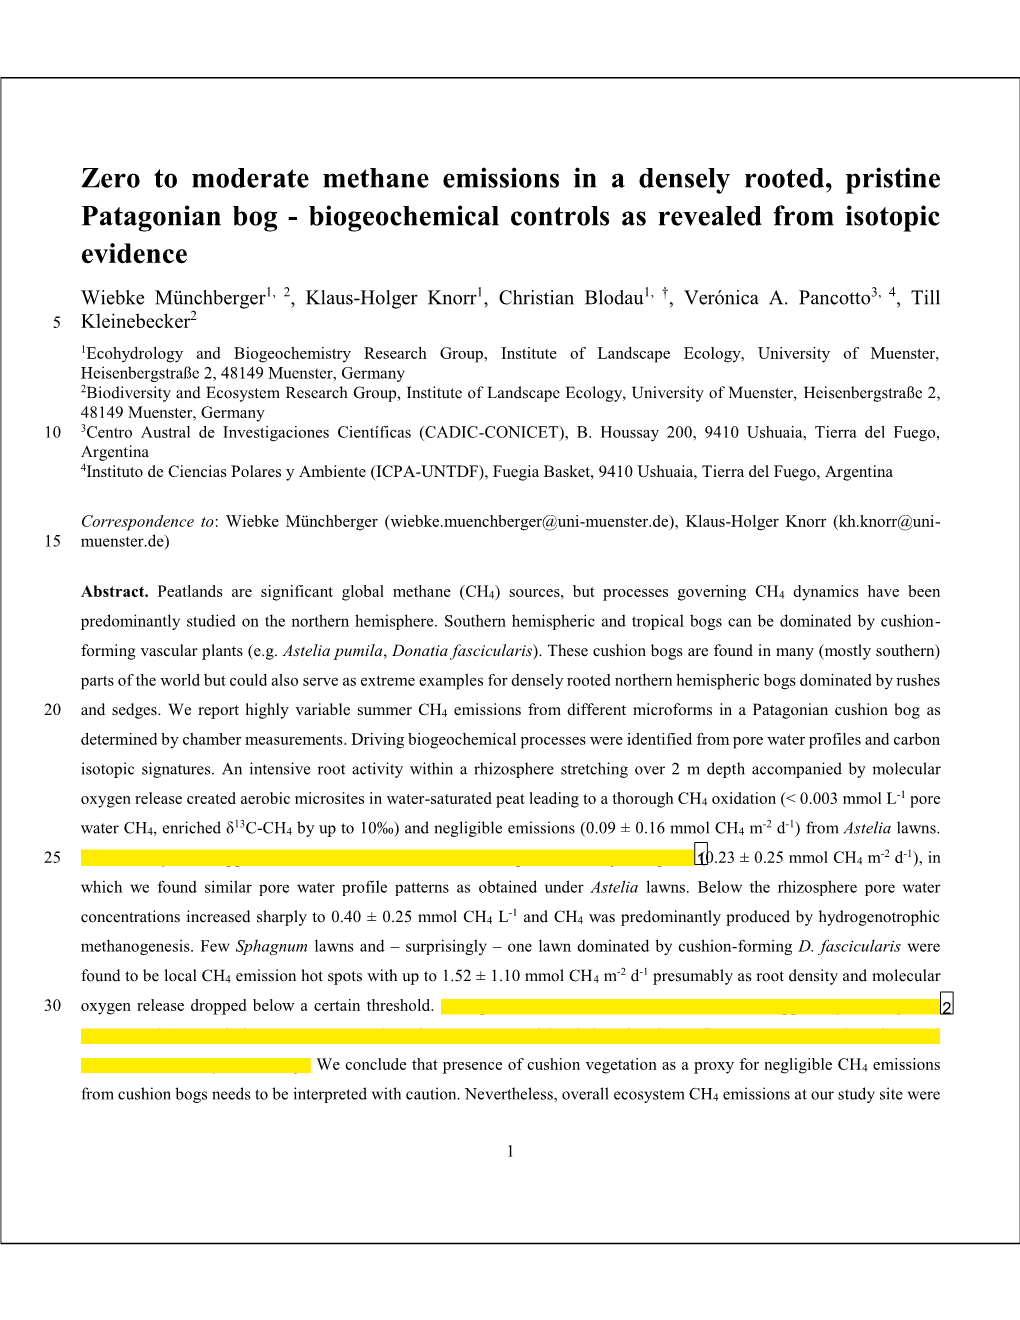 Zero to Moderate Methane Emissions in a Densely